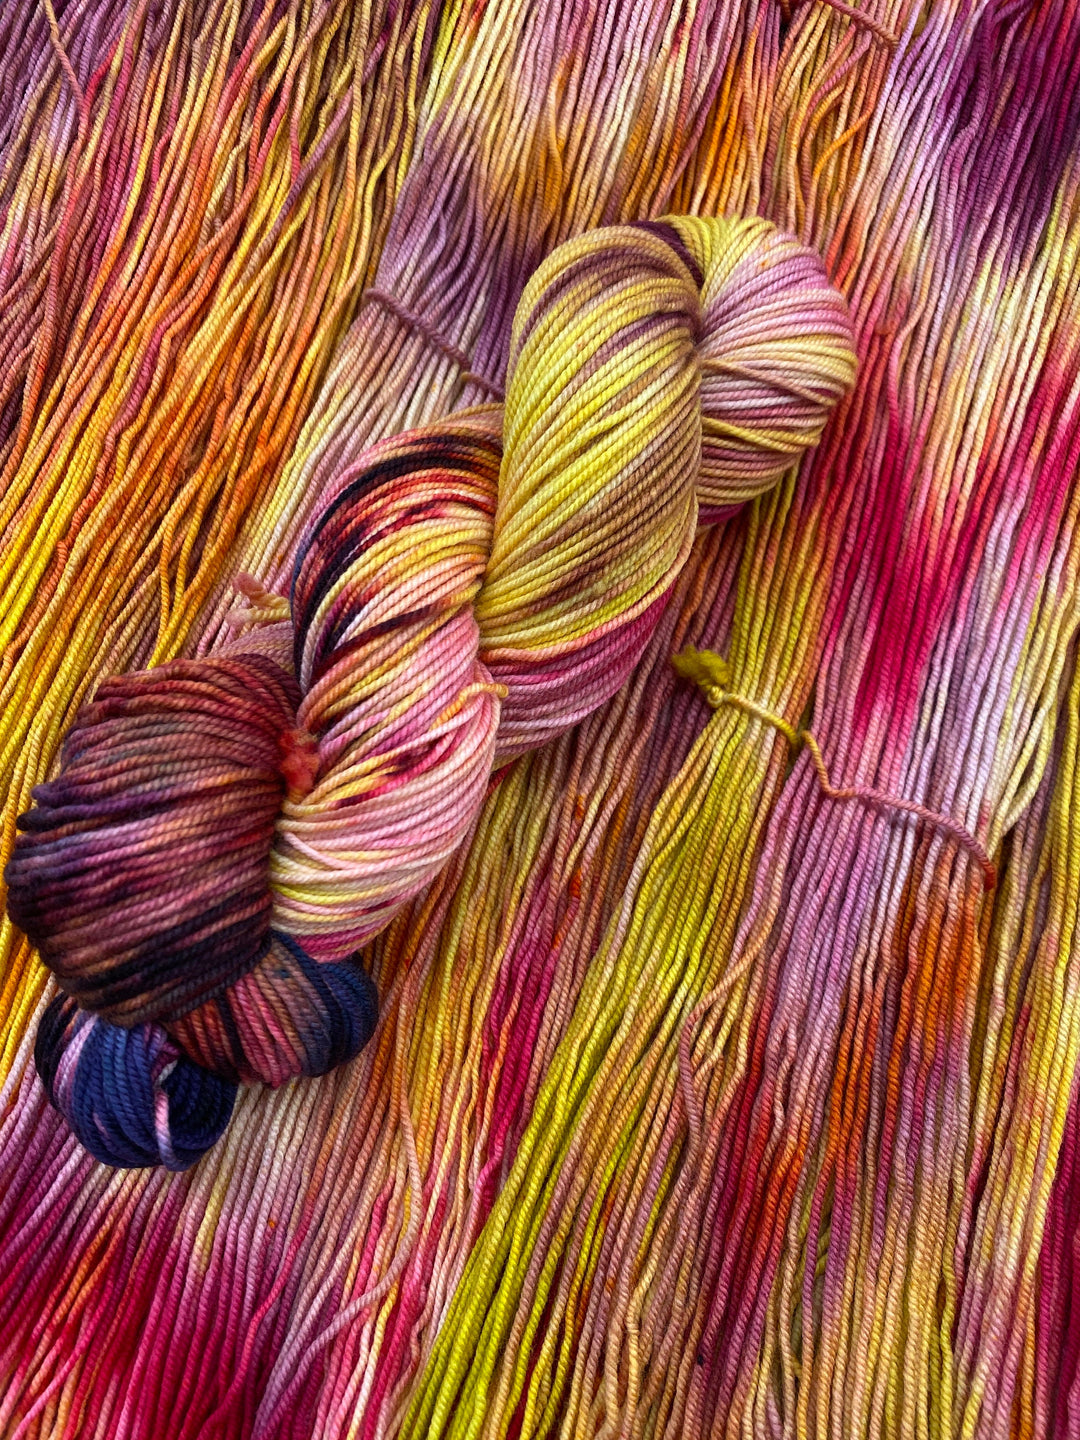 FIGment of Your Imagination - Hand dyed yarn - Mohair - Fingering - Sock - DK - Sport - Worsted - Bulky - Variegated yarn